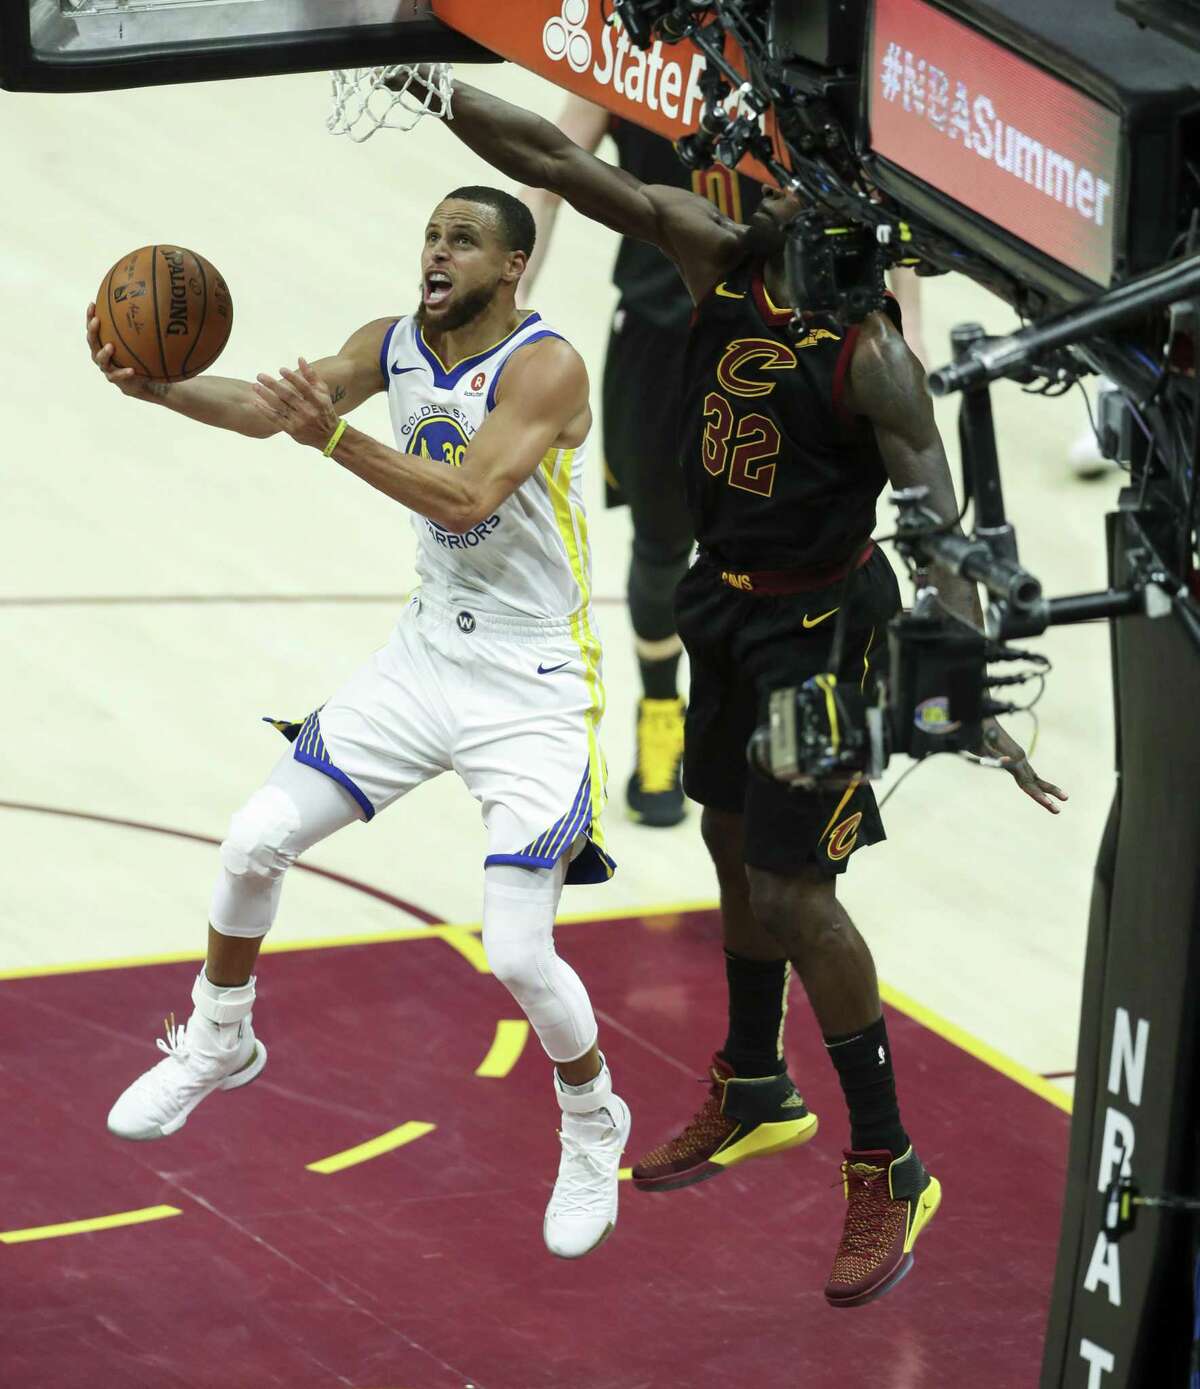 Golden State Warriors' Stephen Curry goes in for a layup under Cleveland Cavaliers' Jeff Green in the third quarter during game 4 of The NBA Finals between the Golden State Warriors and the Cleveland Cavaliers at Oracle Arena on Friday, June 8, 2018 in Cleveland, Ohio.